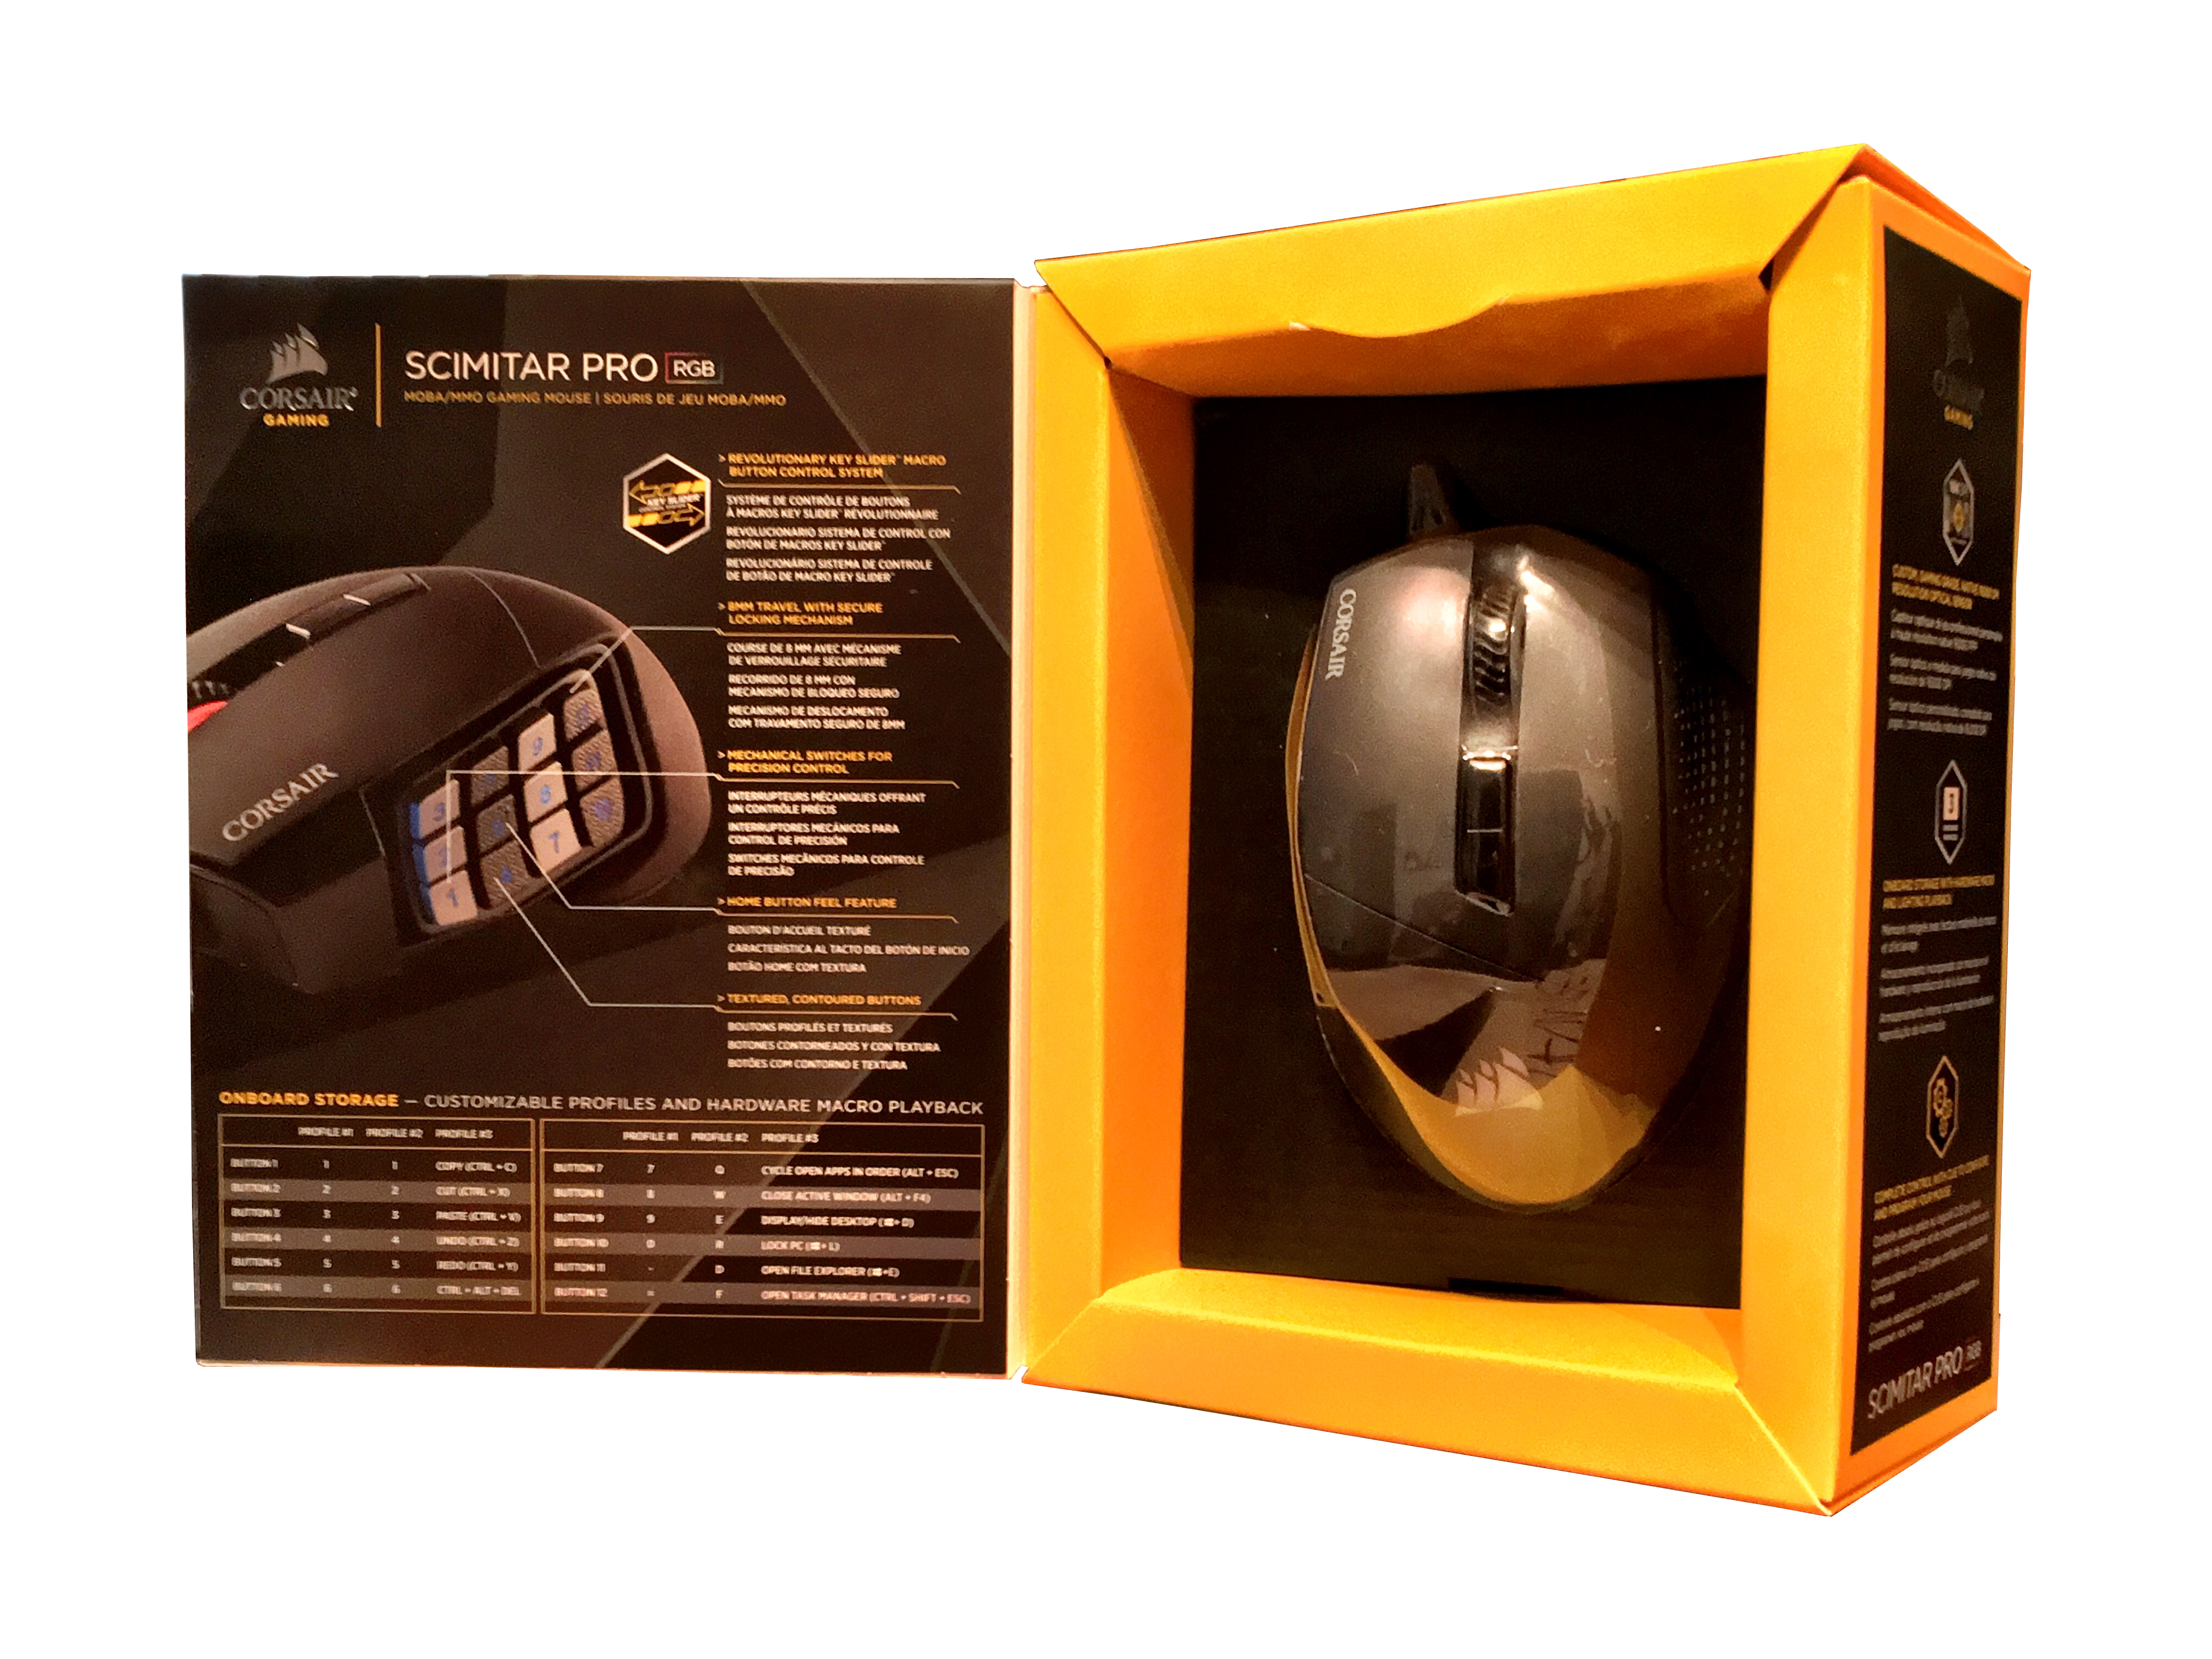 Corsair Pro: A Powerful and Precise Gaming Mouse Built for More Than MOBAs and MMOs – GameSkinny